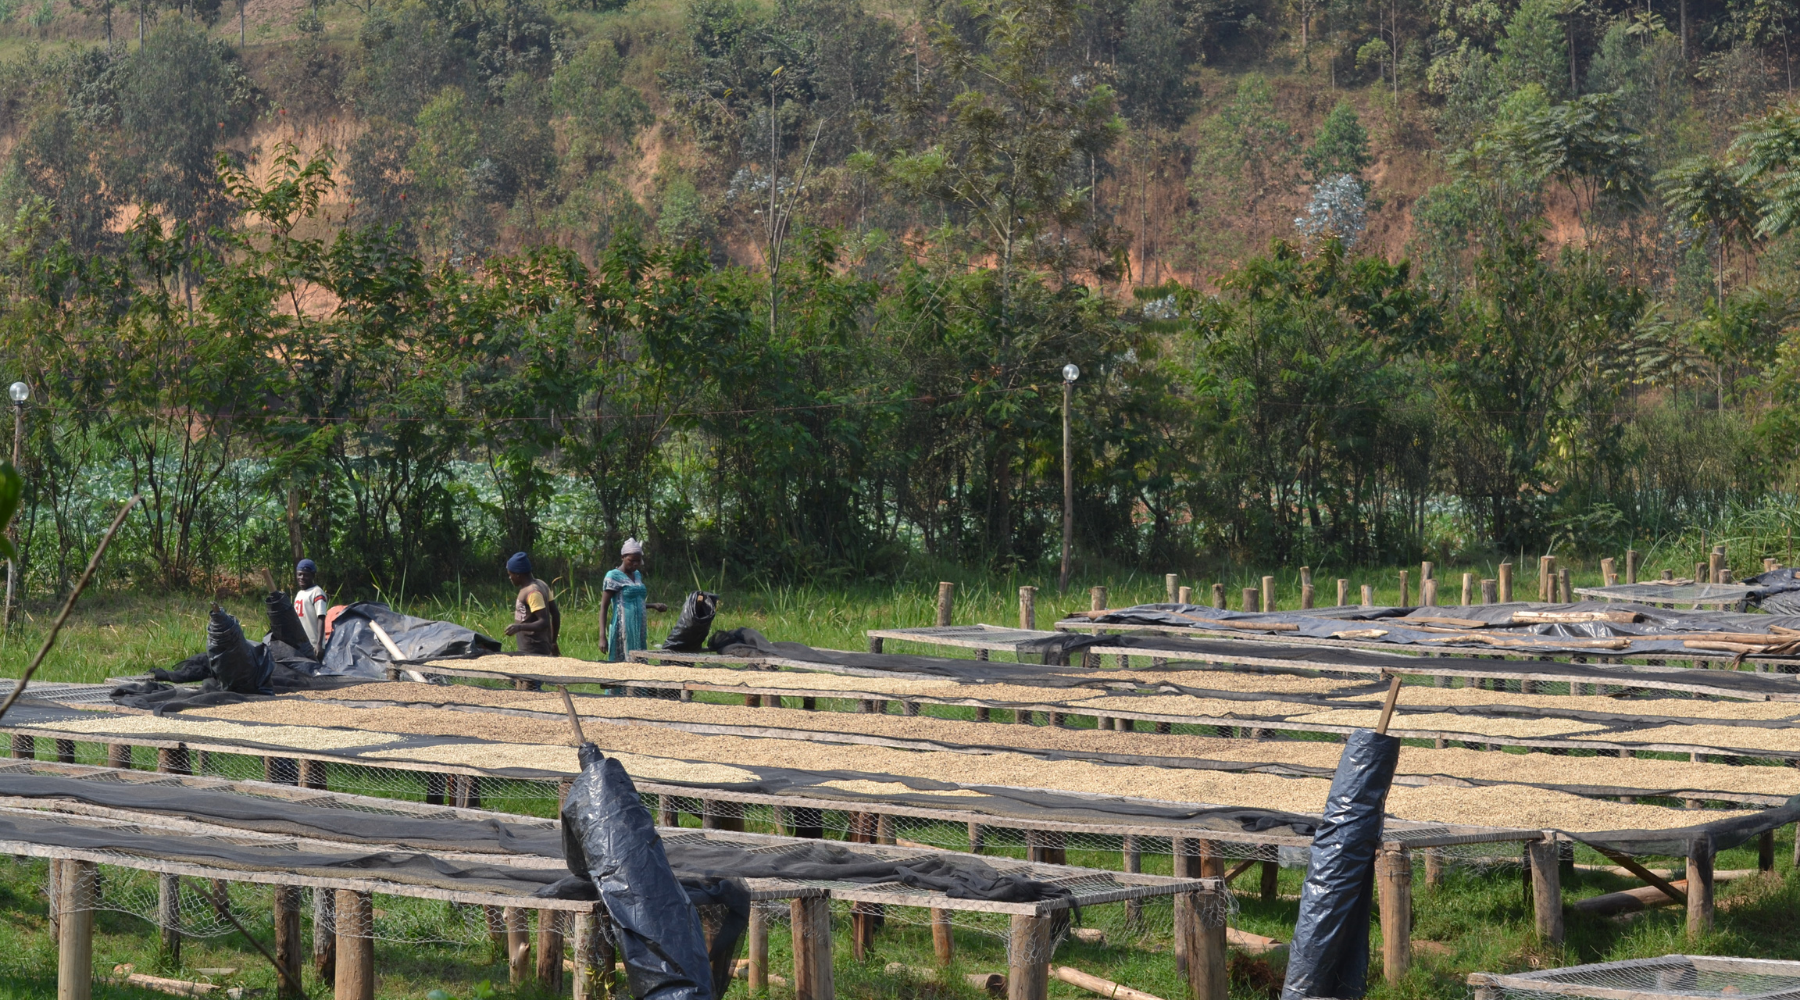 3 African Sisters (Crop to Cup Blog) - Fair Trade Organic Rwandan Coffee - Green Beans Drying on Raised Coffee Drying Beds with Coffee Farmers